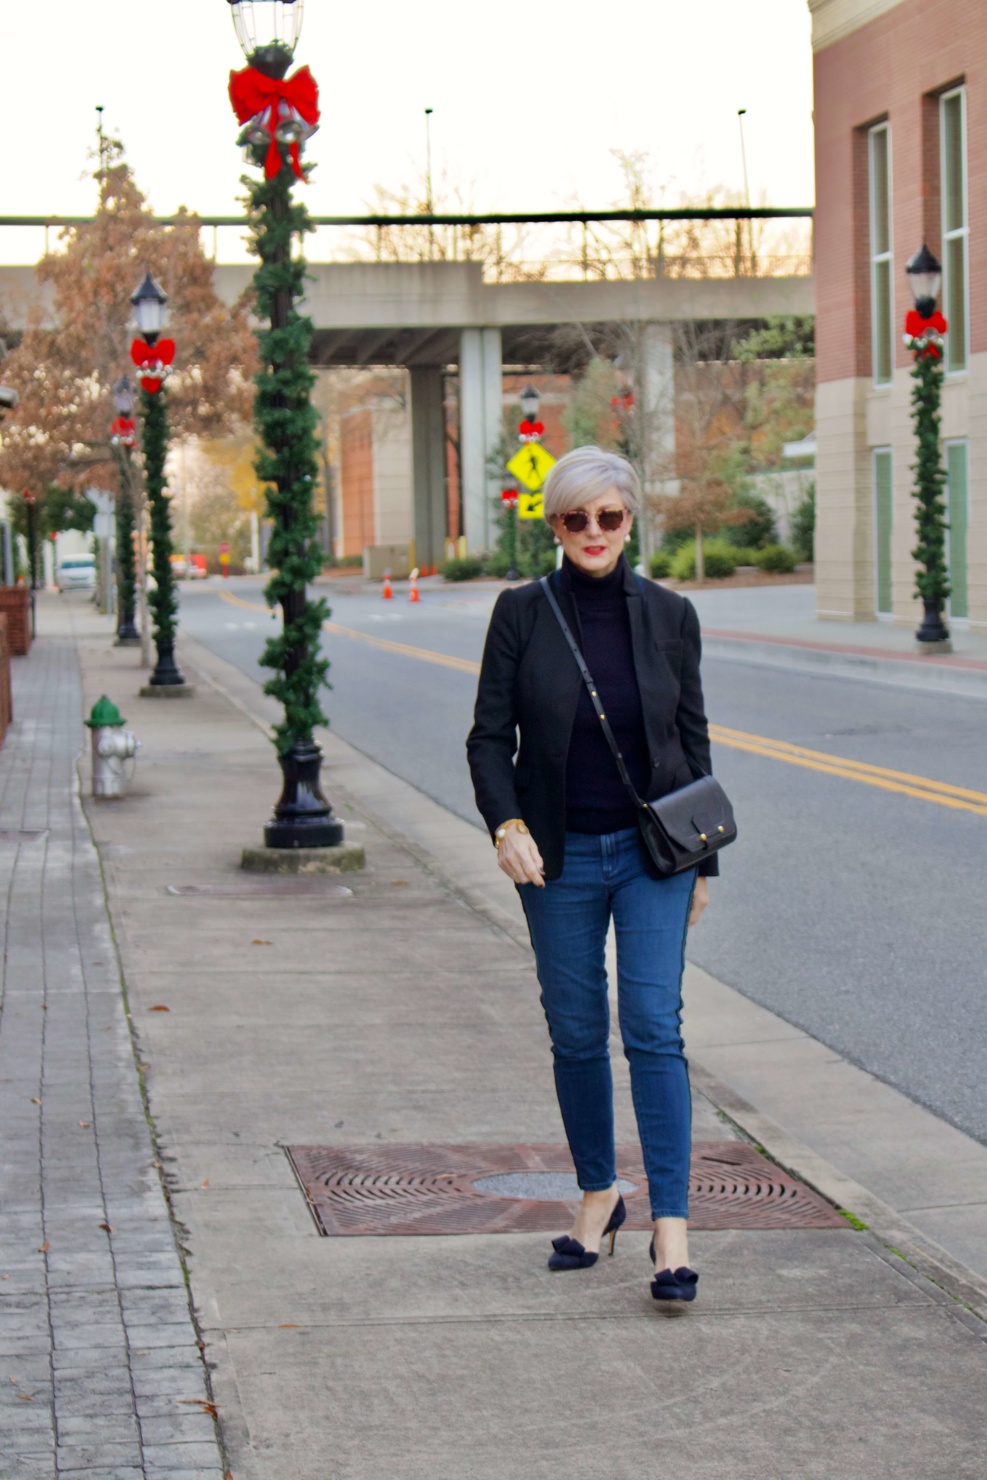 beth from style at a certain age wears tuxedo denim from Ann Taylor, cashmere turtleneck from Everlane and Parker blazer from J.Crew